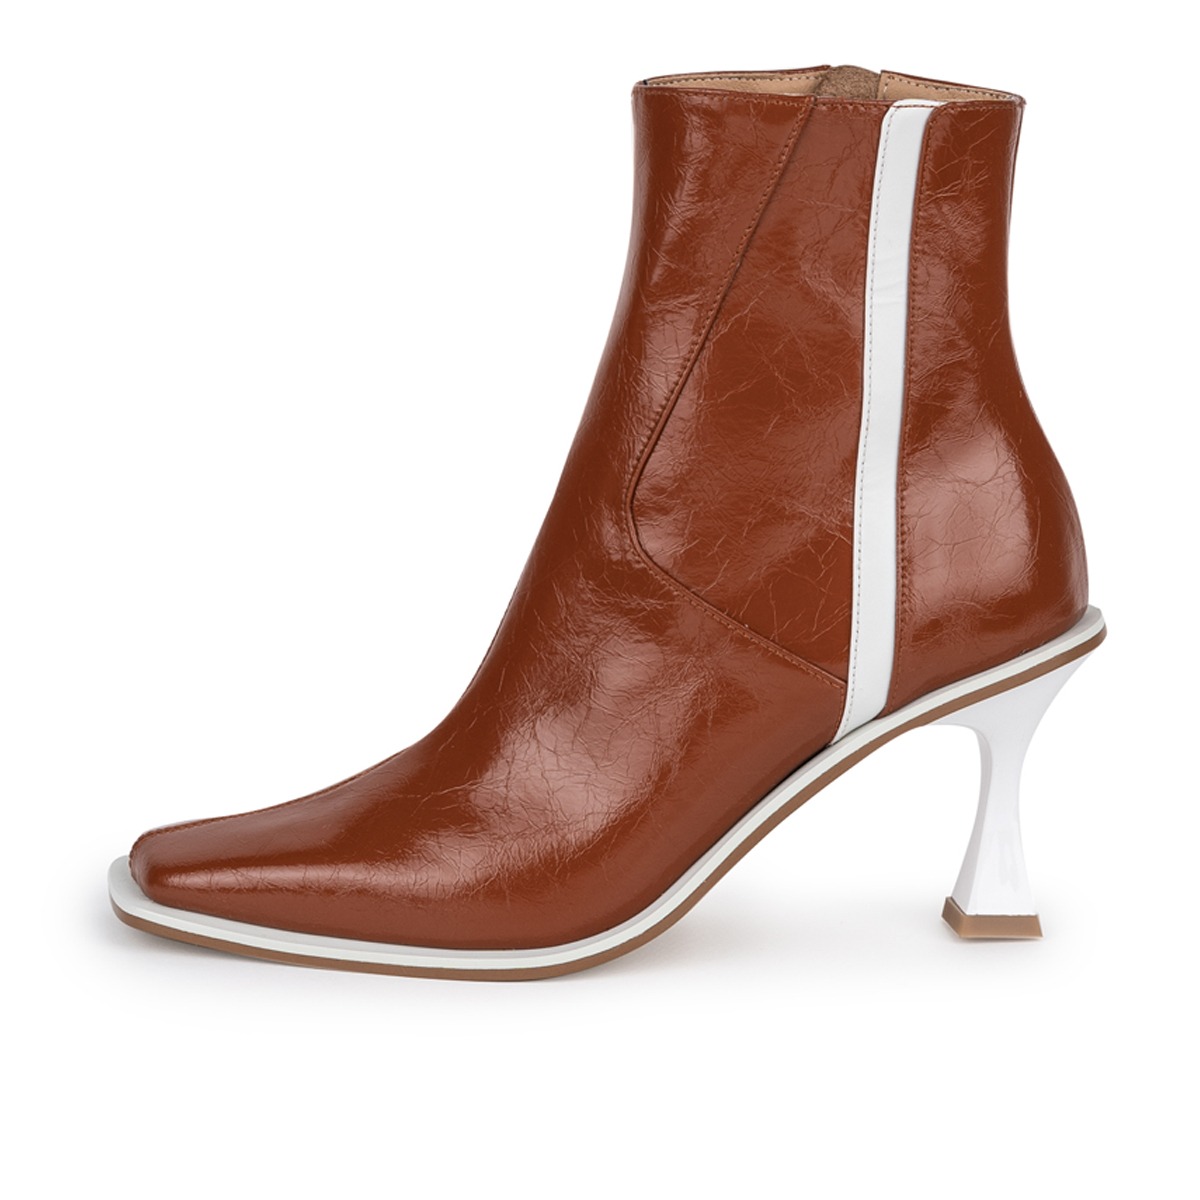 TOKYO ankle boots (rust)